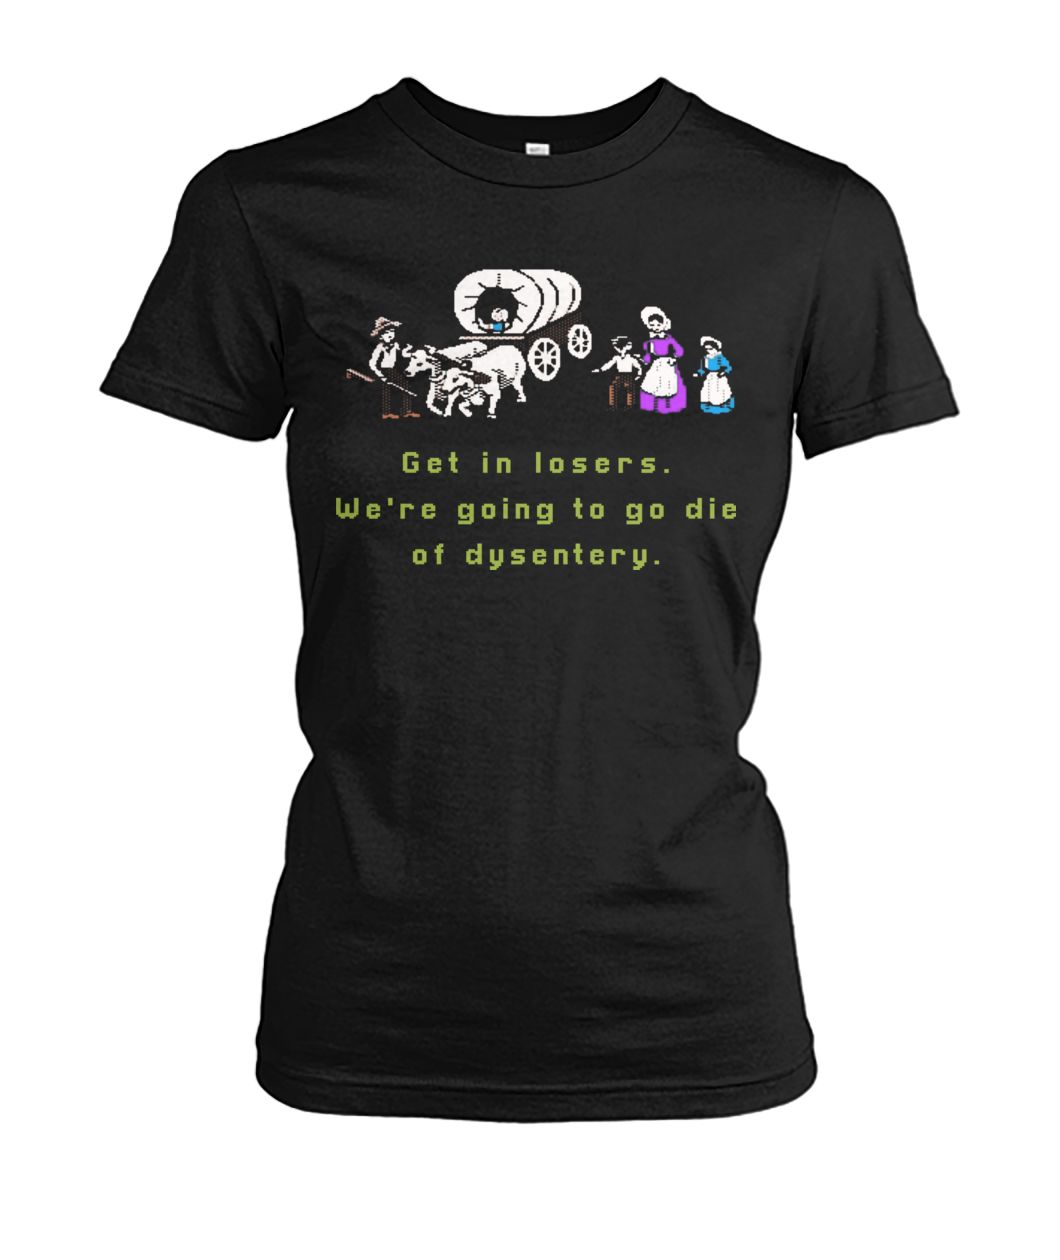 Get in losers we are going to go die of dysentery women's crew tee